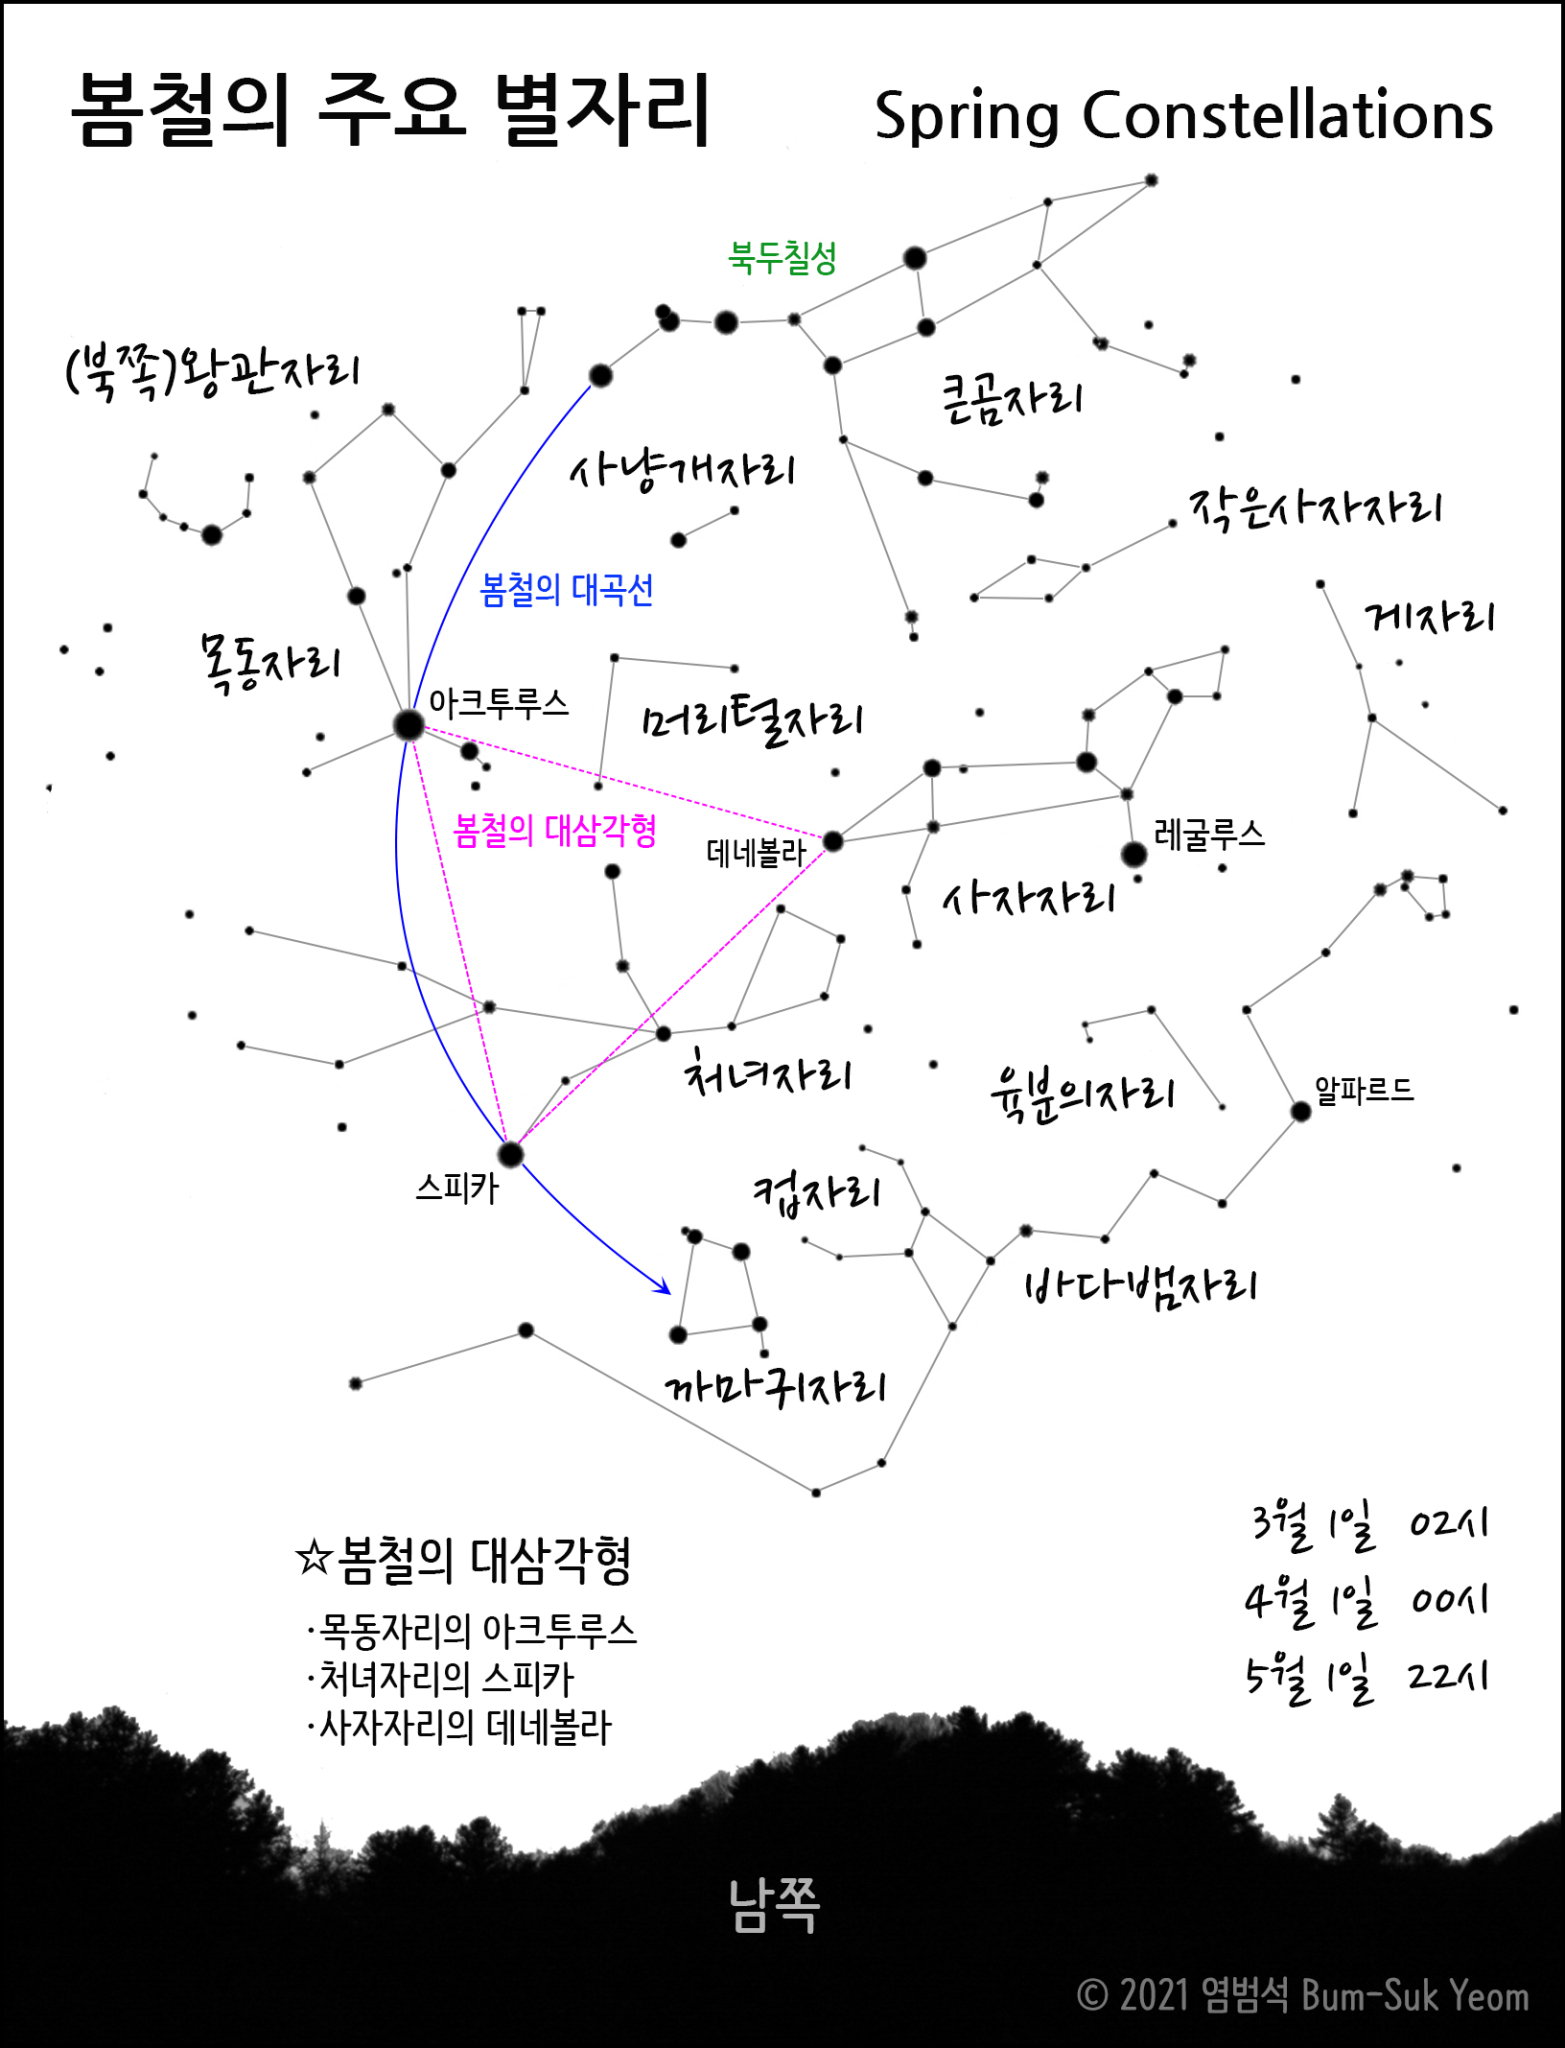 constellation_chart_01_spring_2021_bsyeom